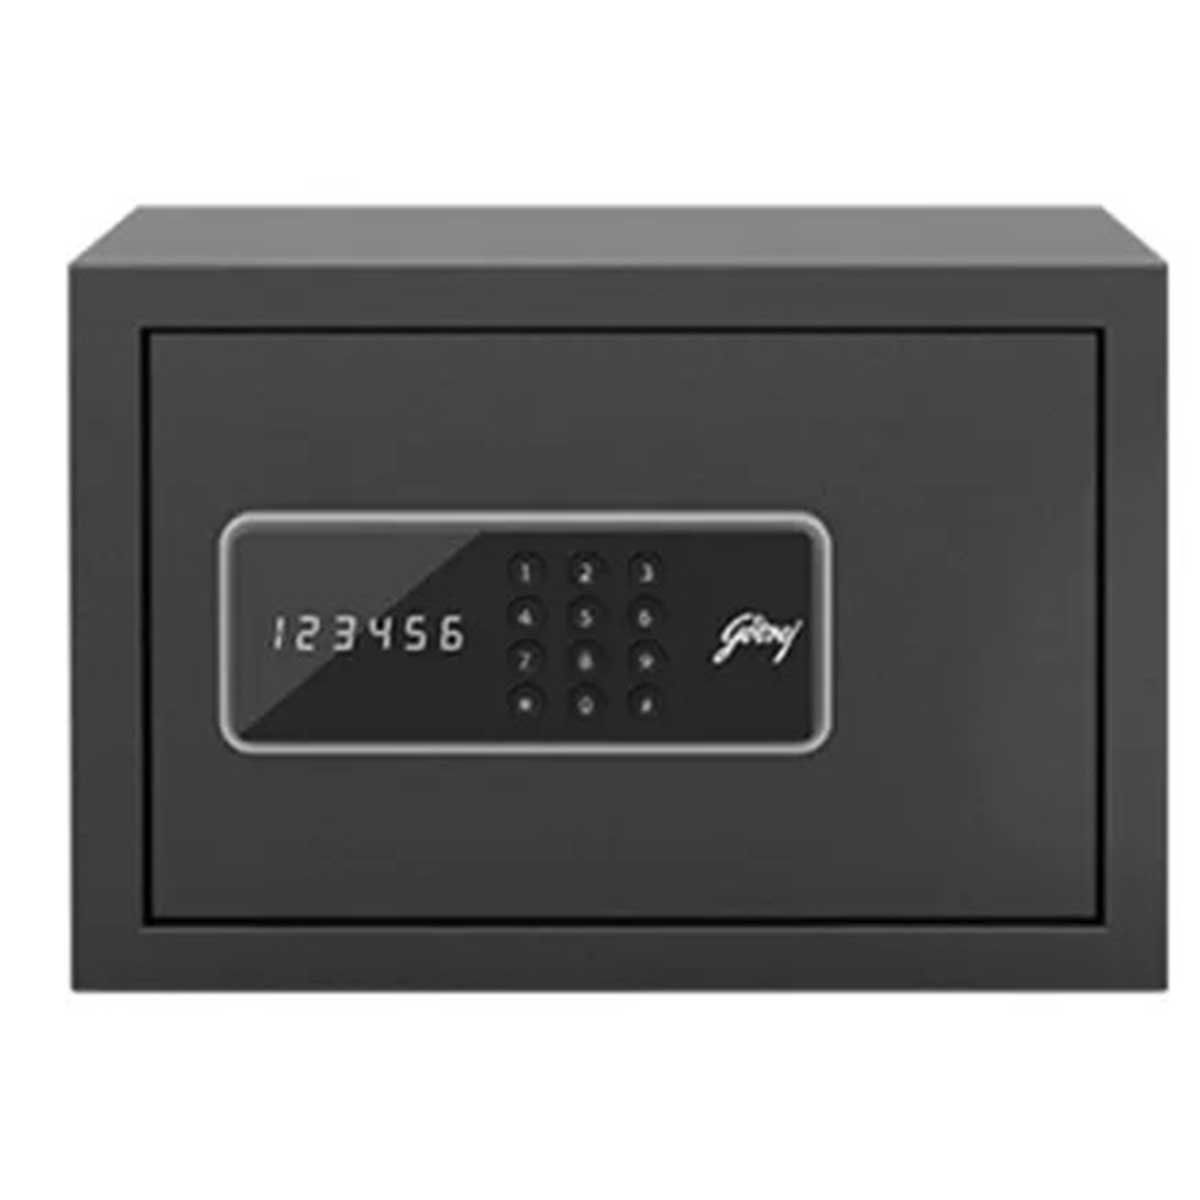 Security Safes Manufacturers, Suppliers in Noida Sector 49